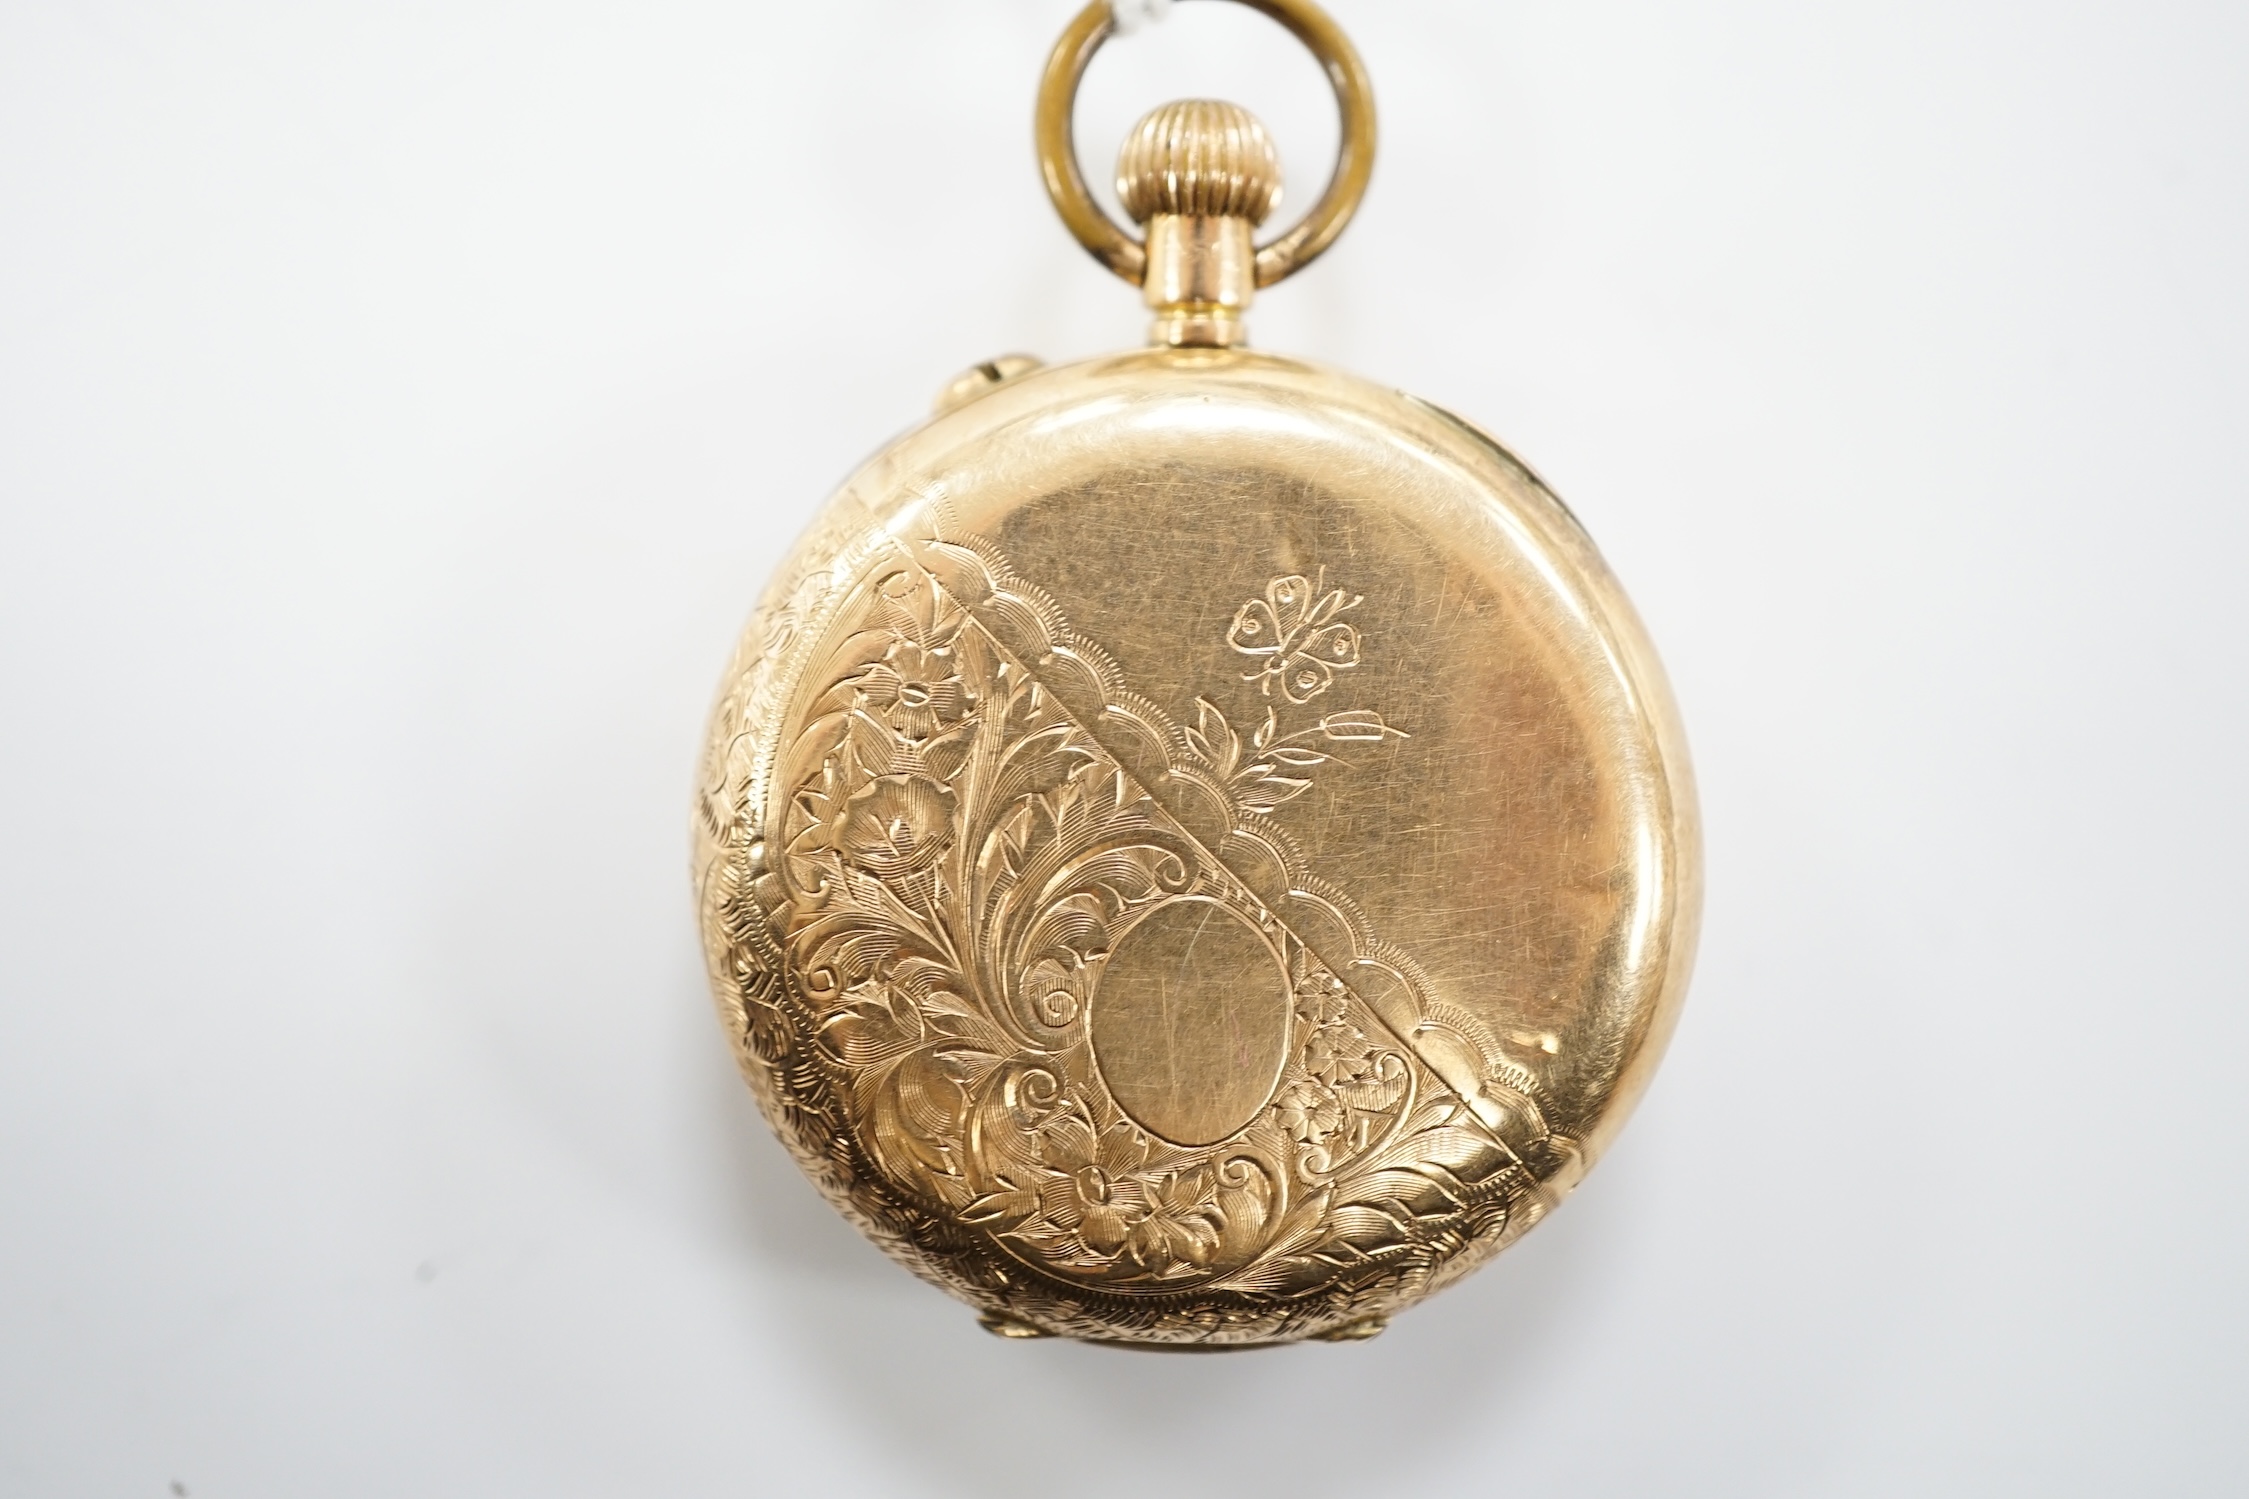 A continental 14k open face keyless fob watch, with Roman dial